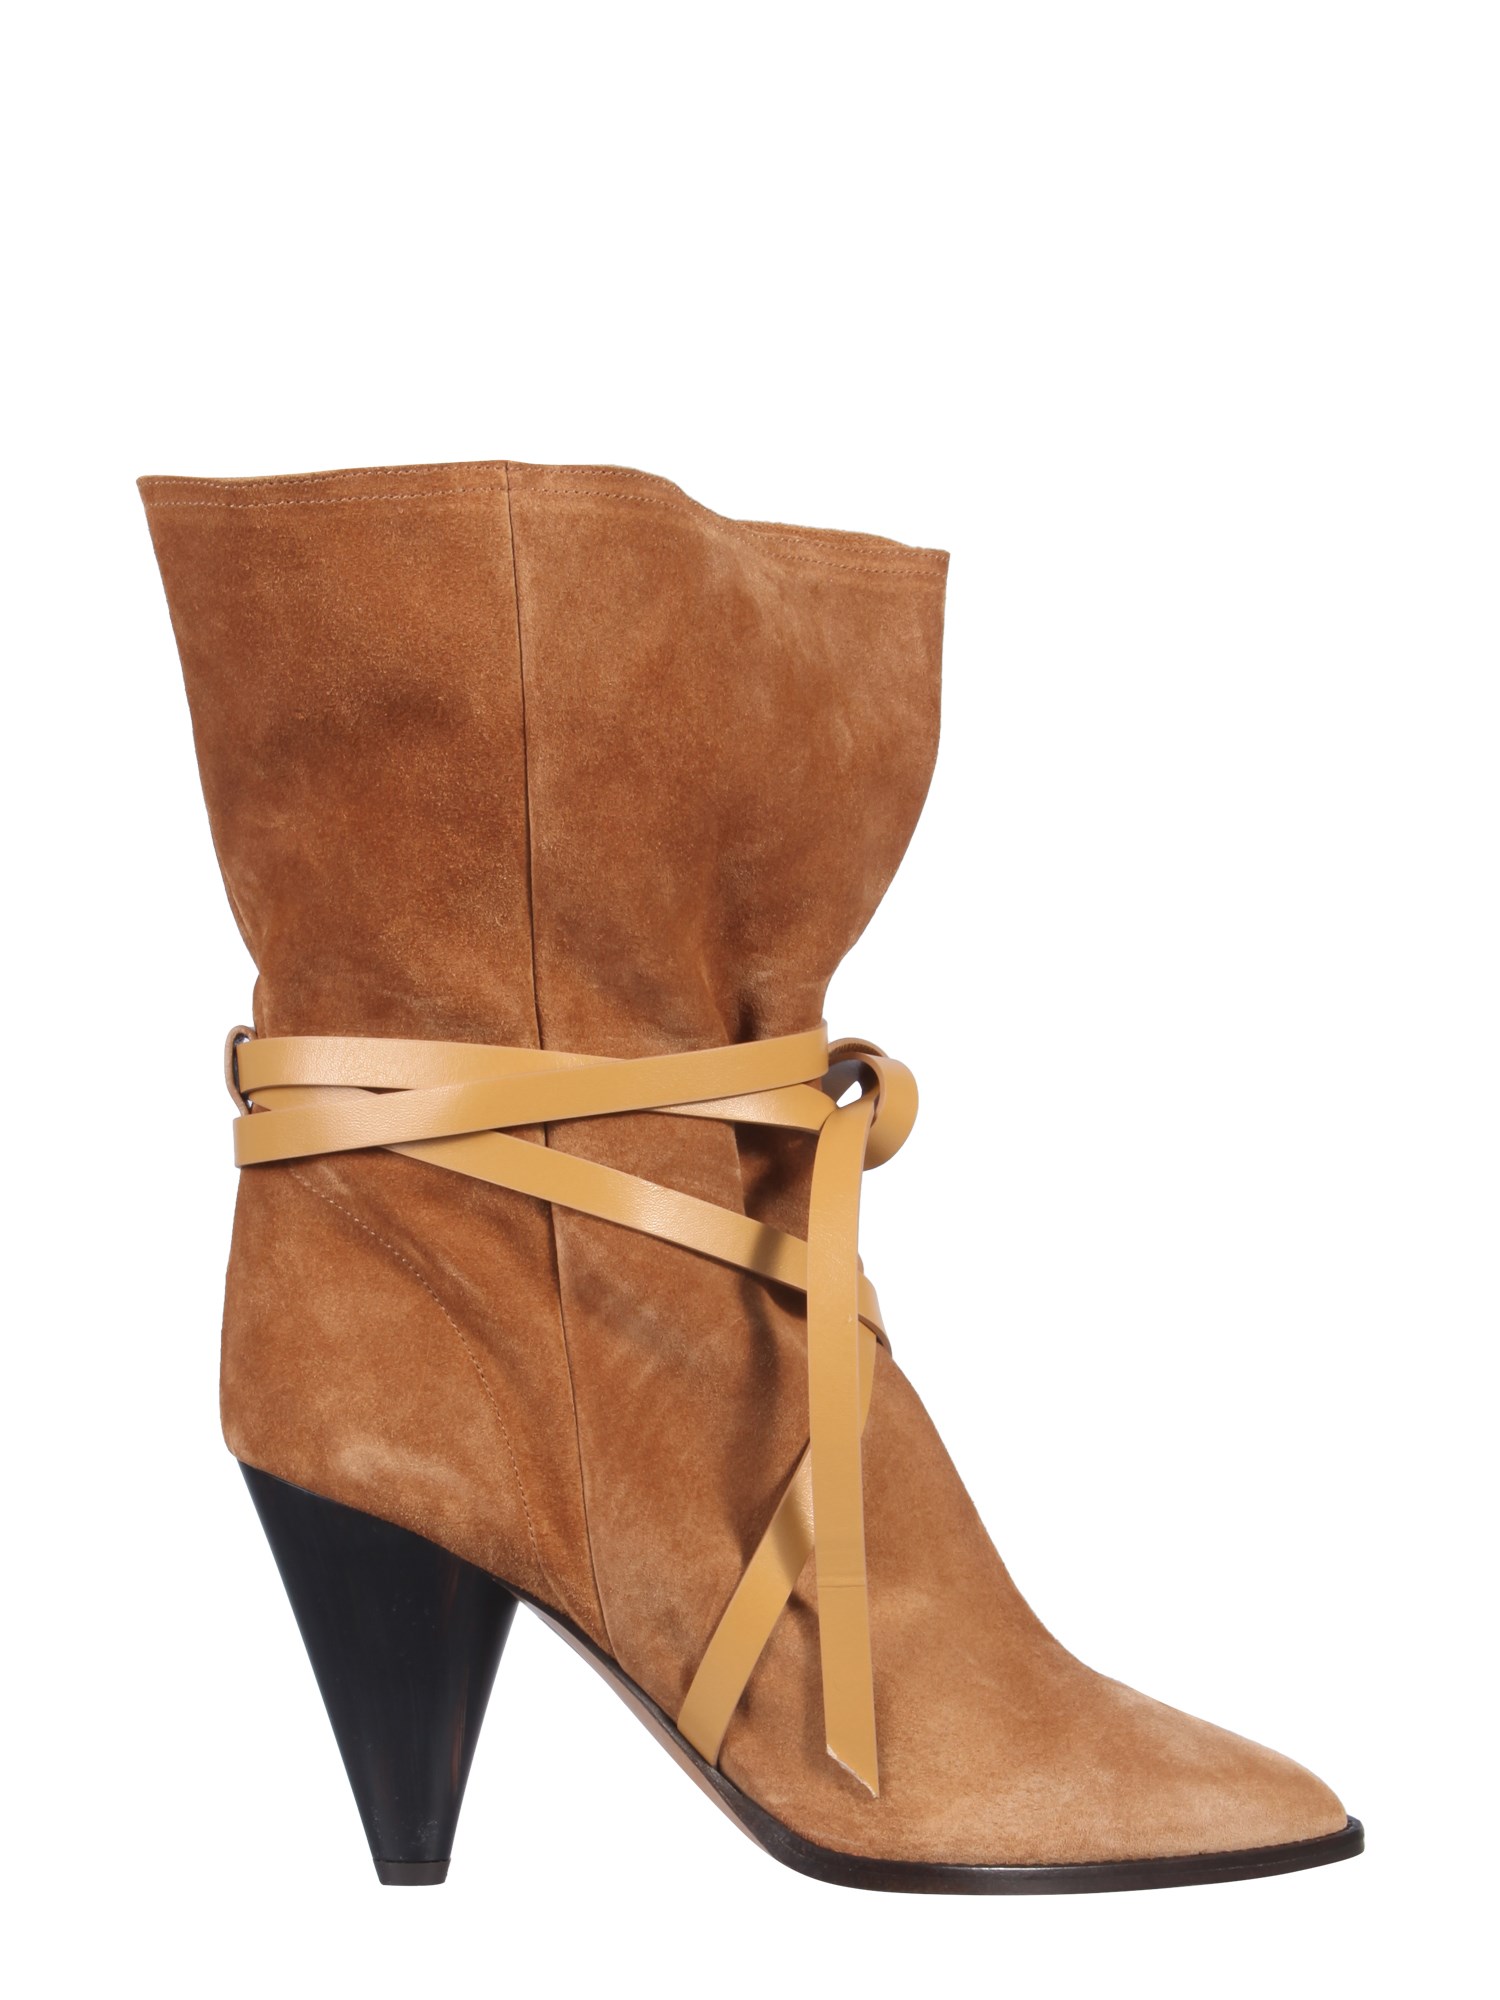 isabel marant lidly boots